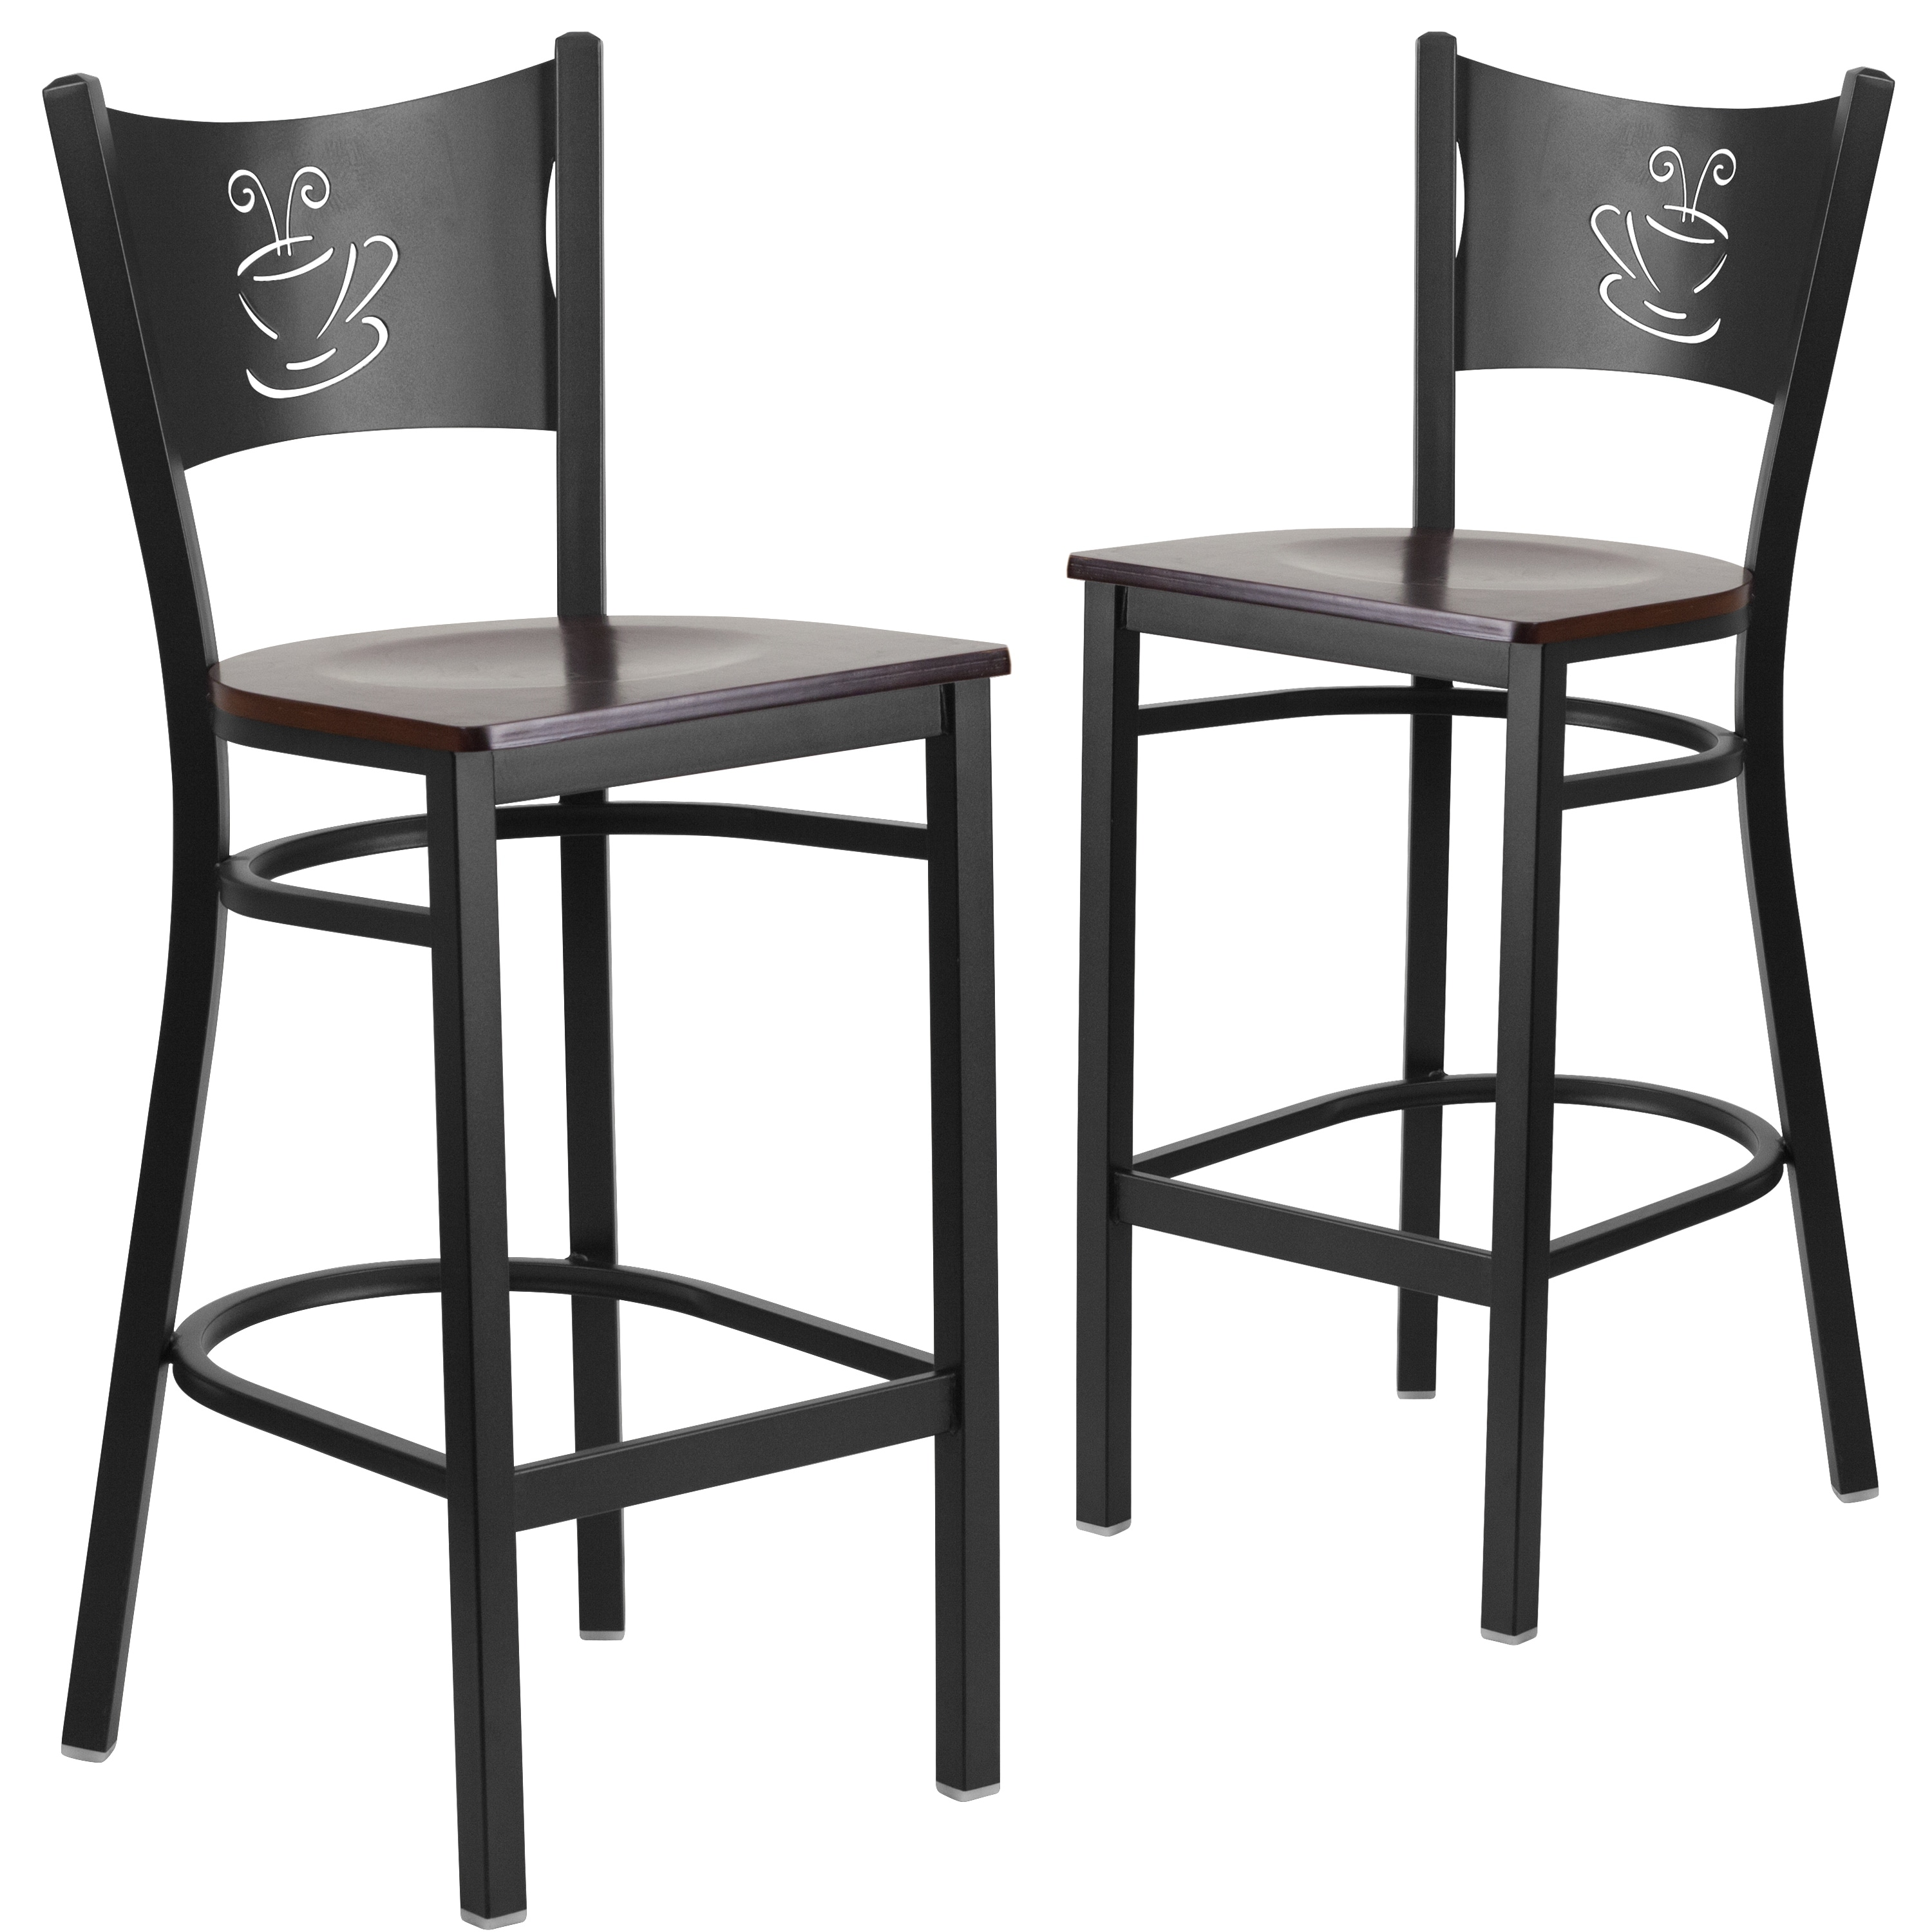 details about black metal restaurant bar stools with coffee cup cutout  walnut wood seat black